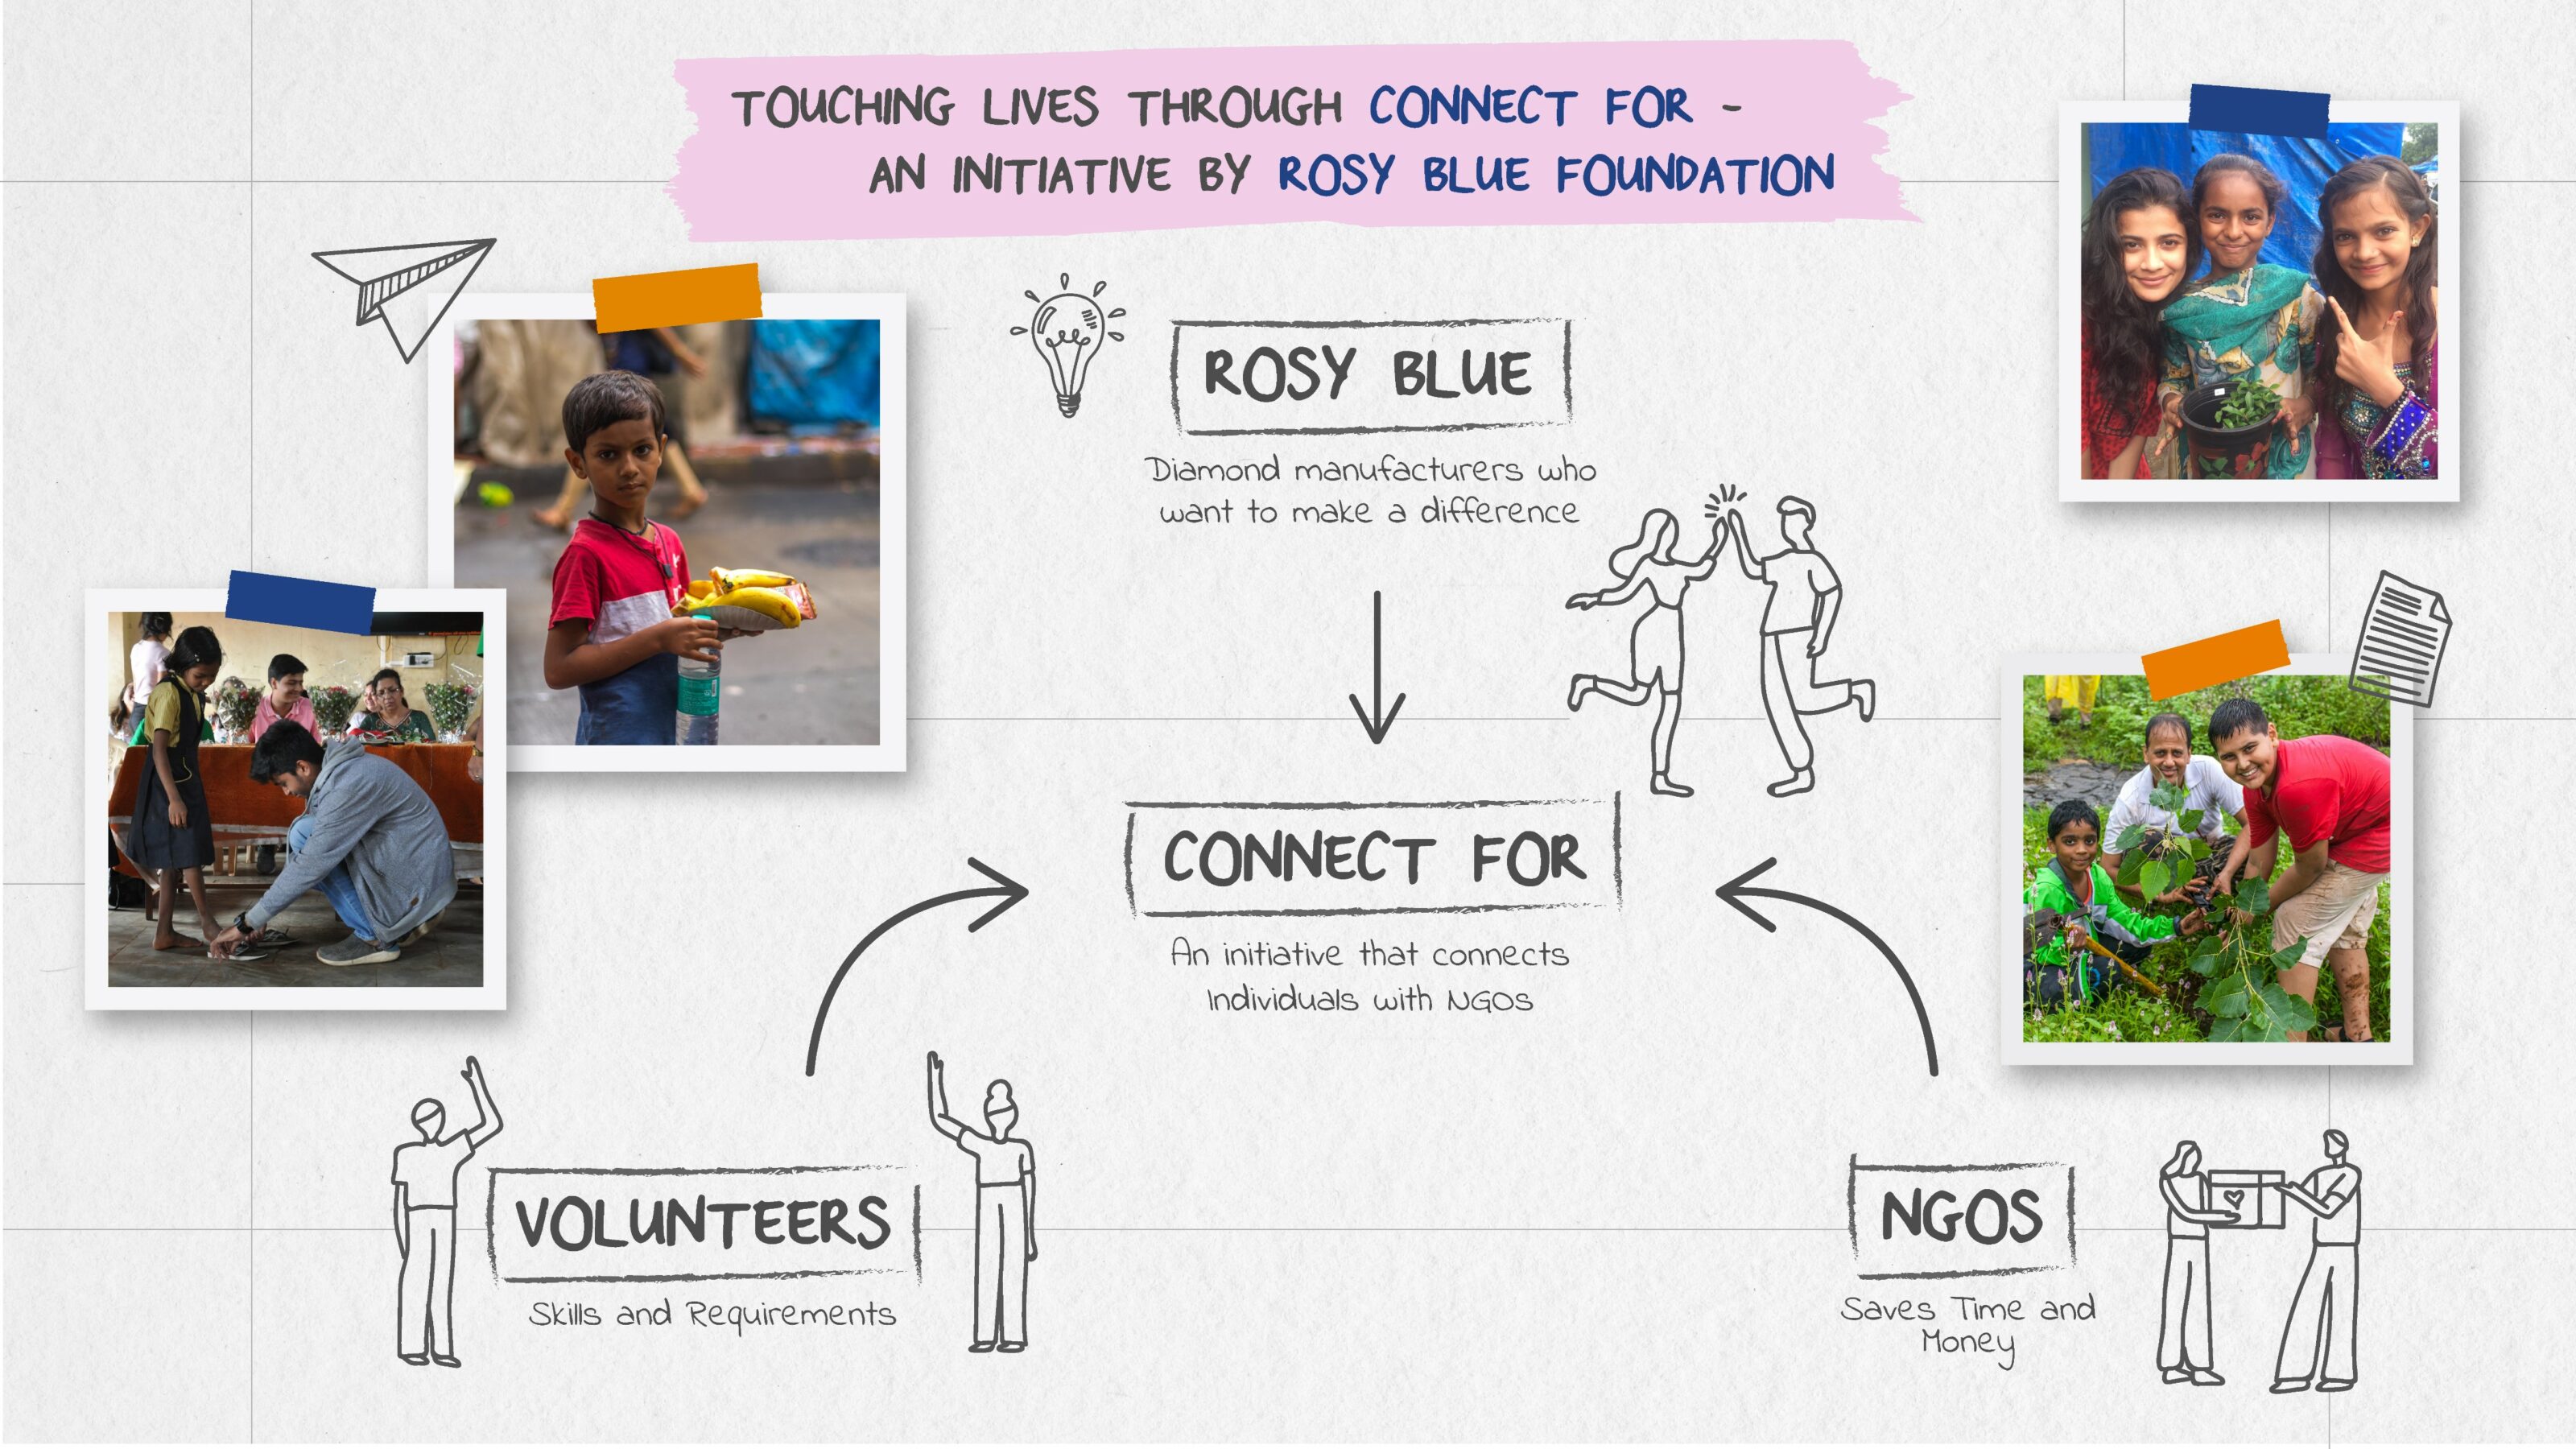 ConnectFor – An Initiative by Rosy Blue Foundation